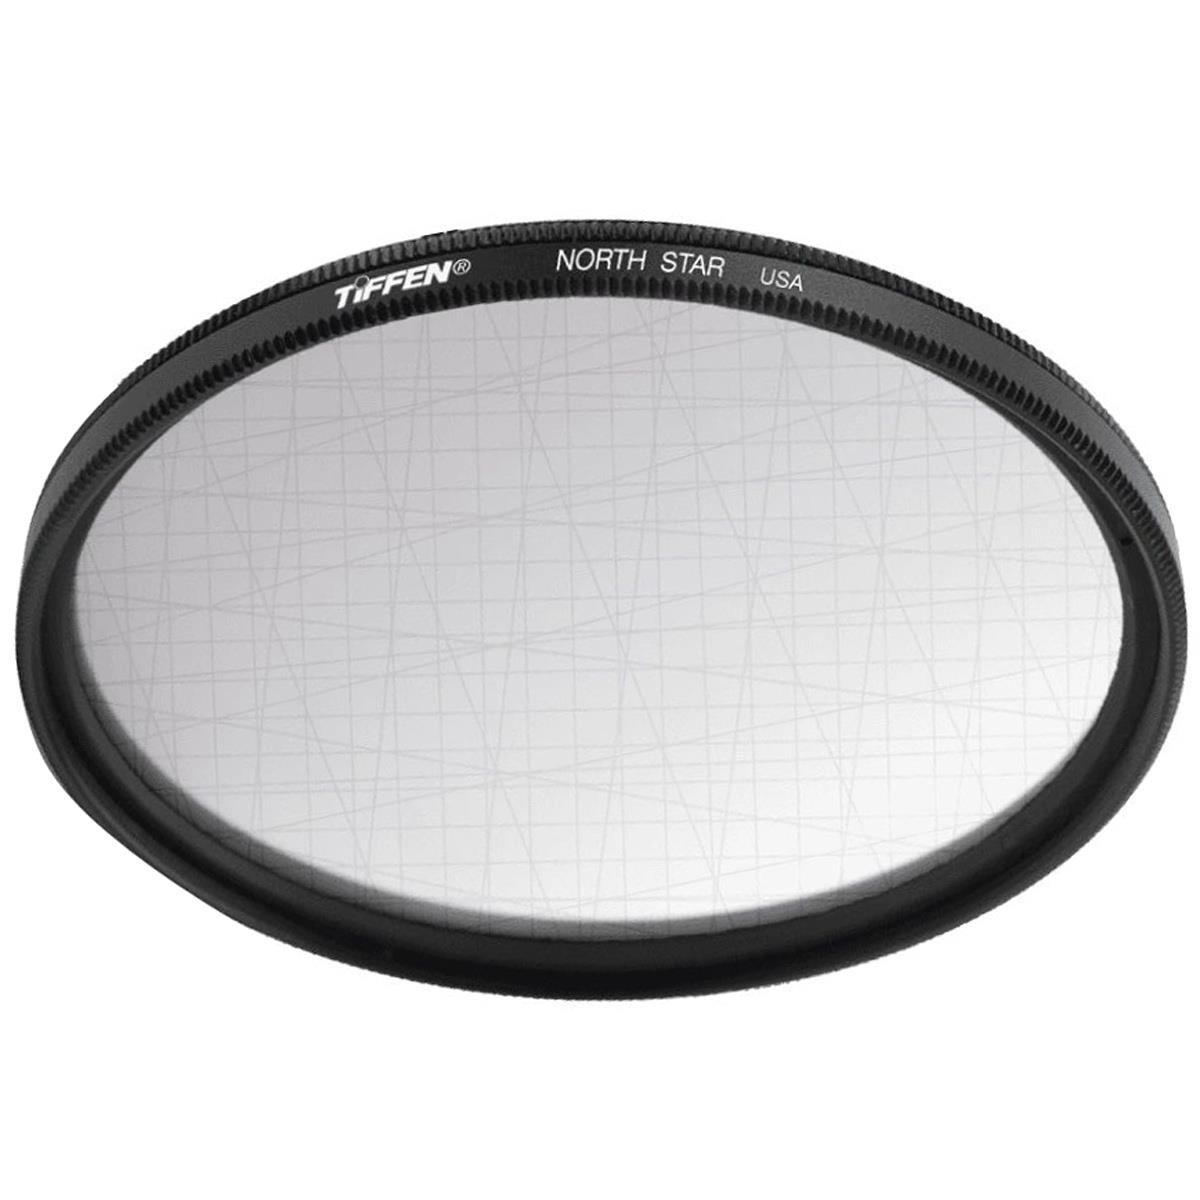 Image of Tiffen 62mm North Star/FX Special Star Effect Filter